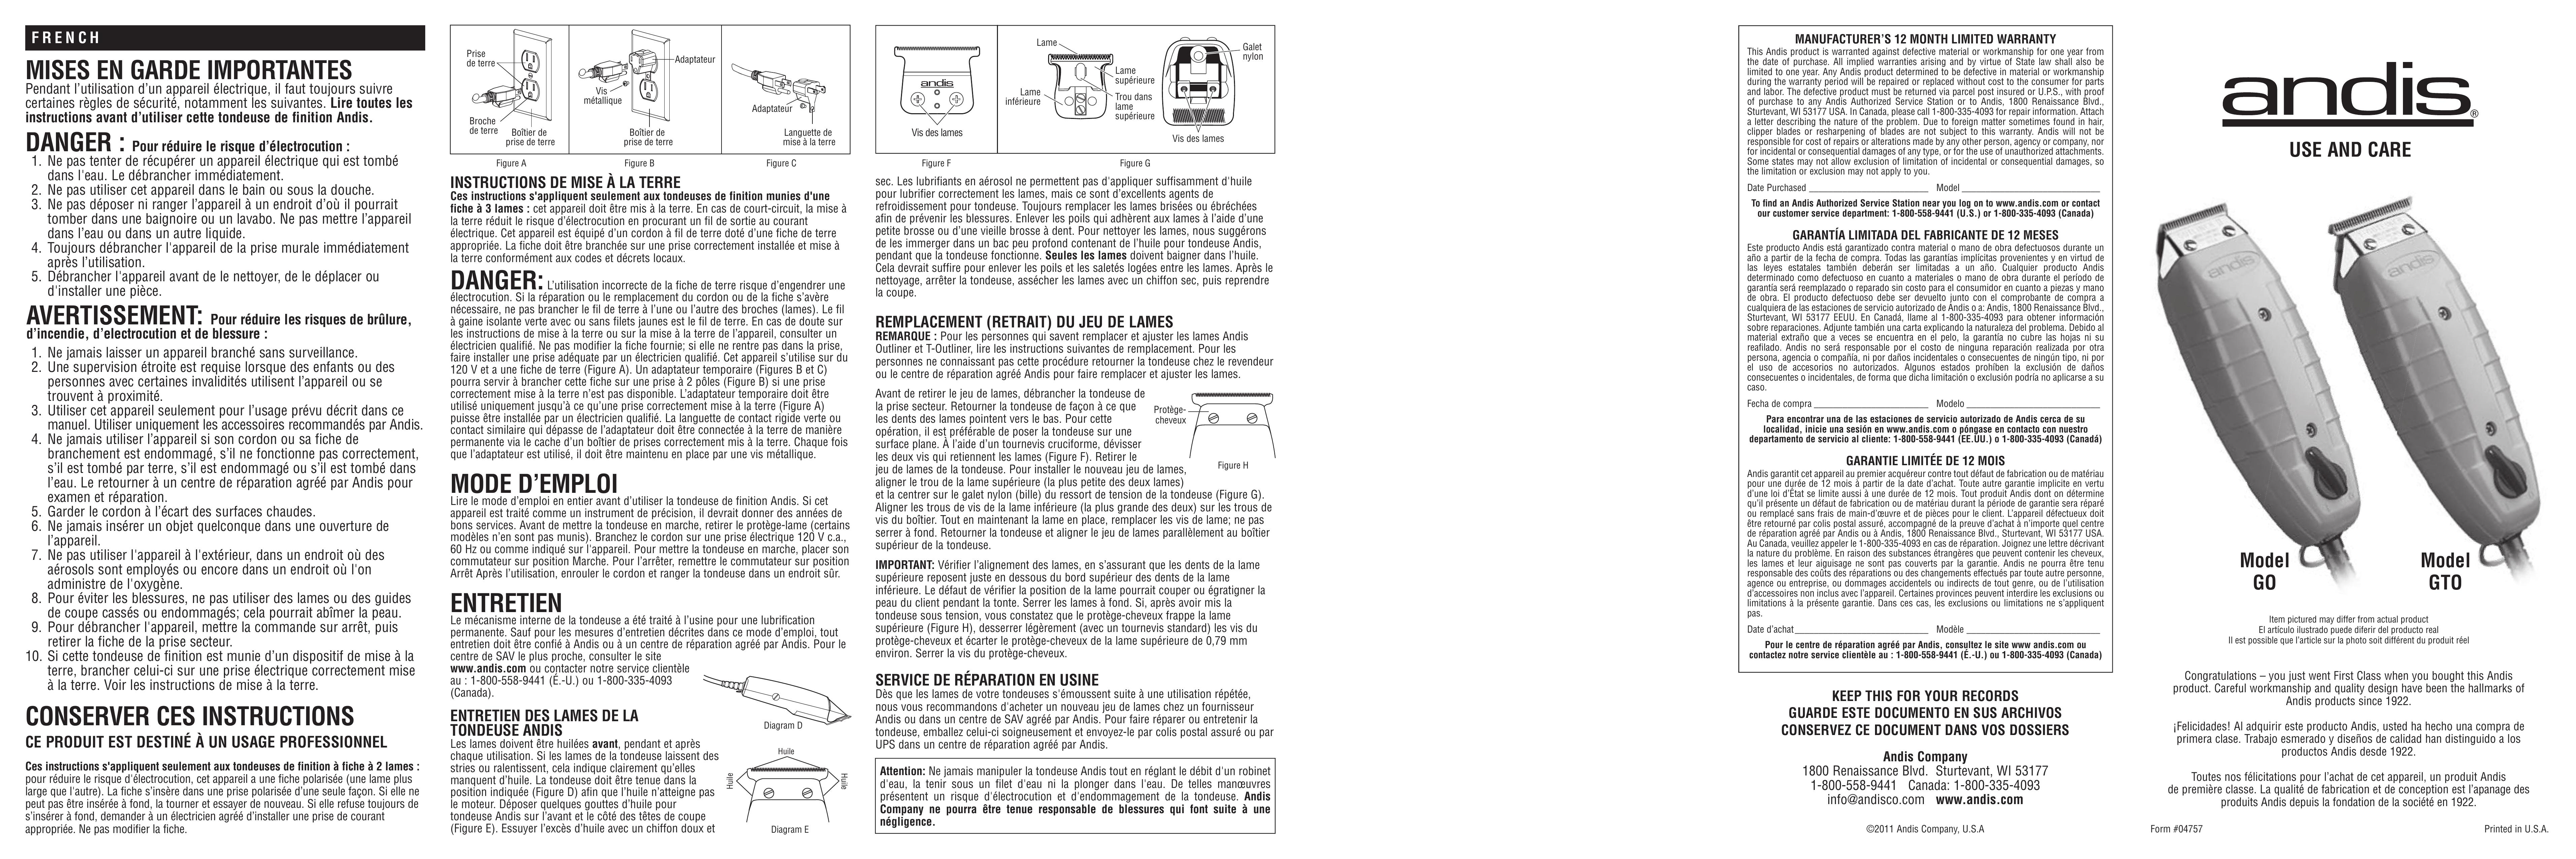 Andis Company GO Electric Shaver User Manual